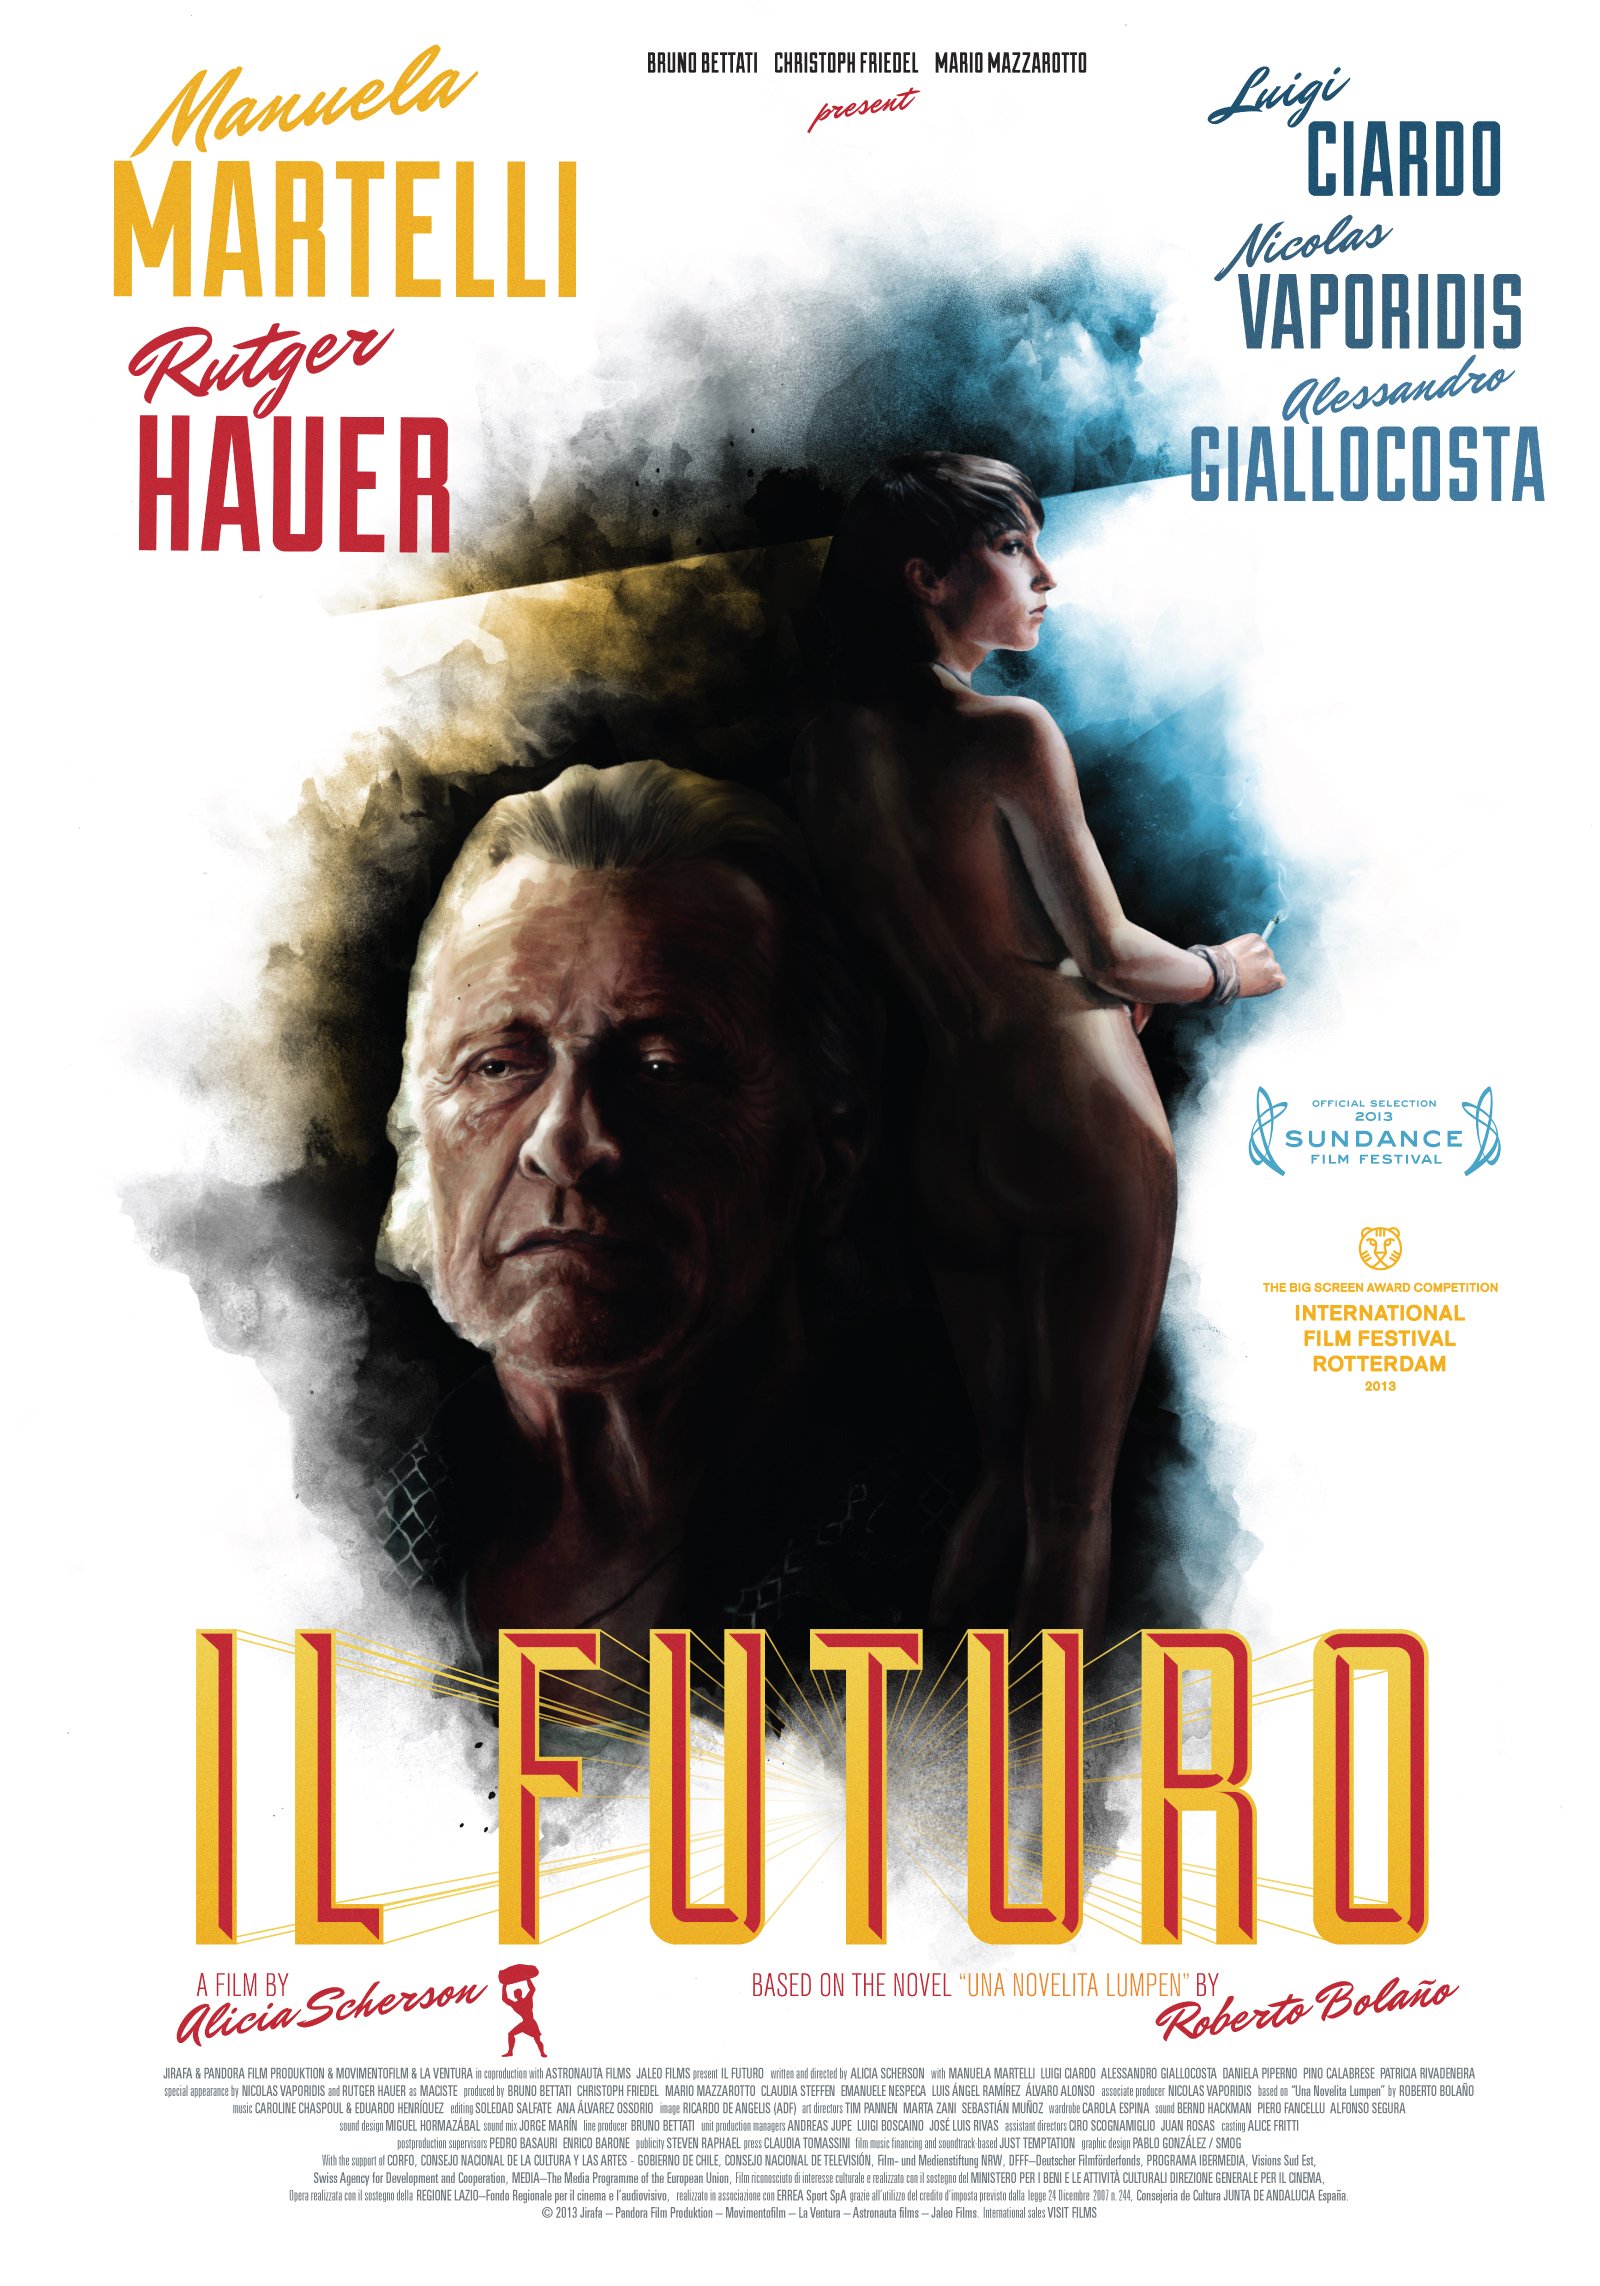 Poster of the movie The Future